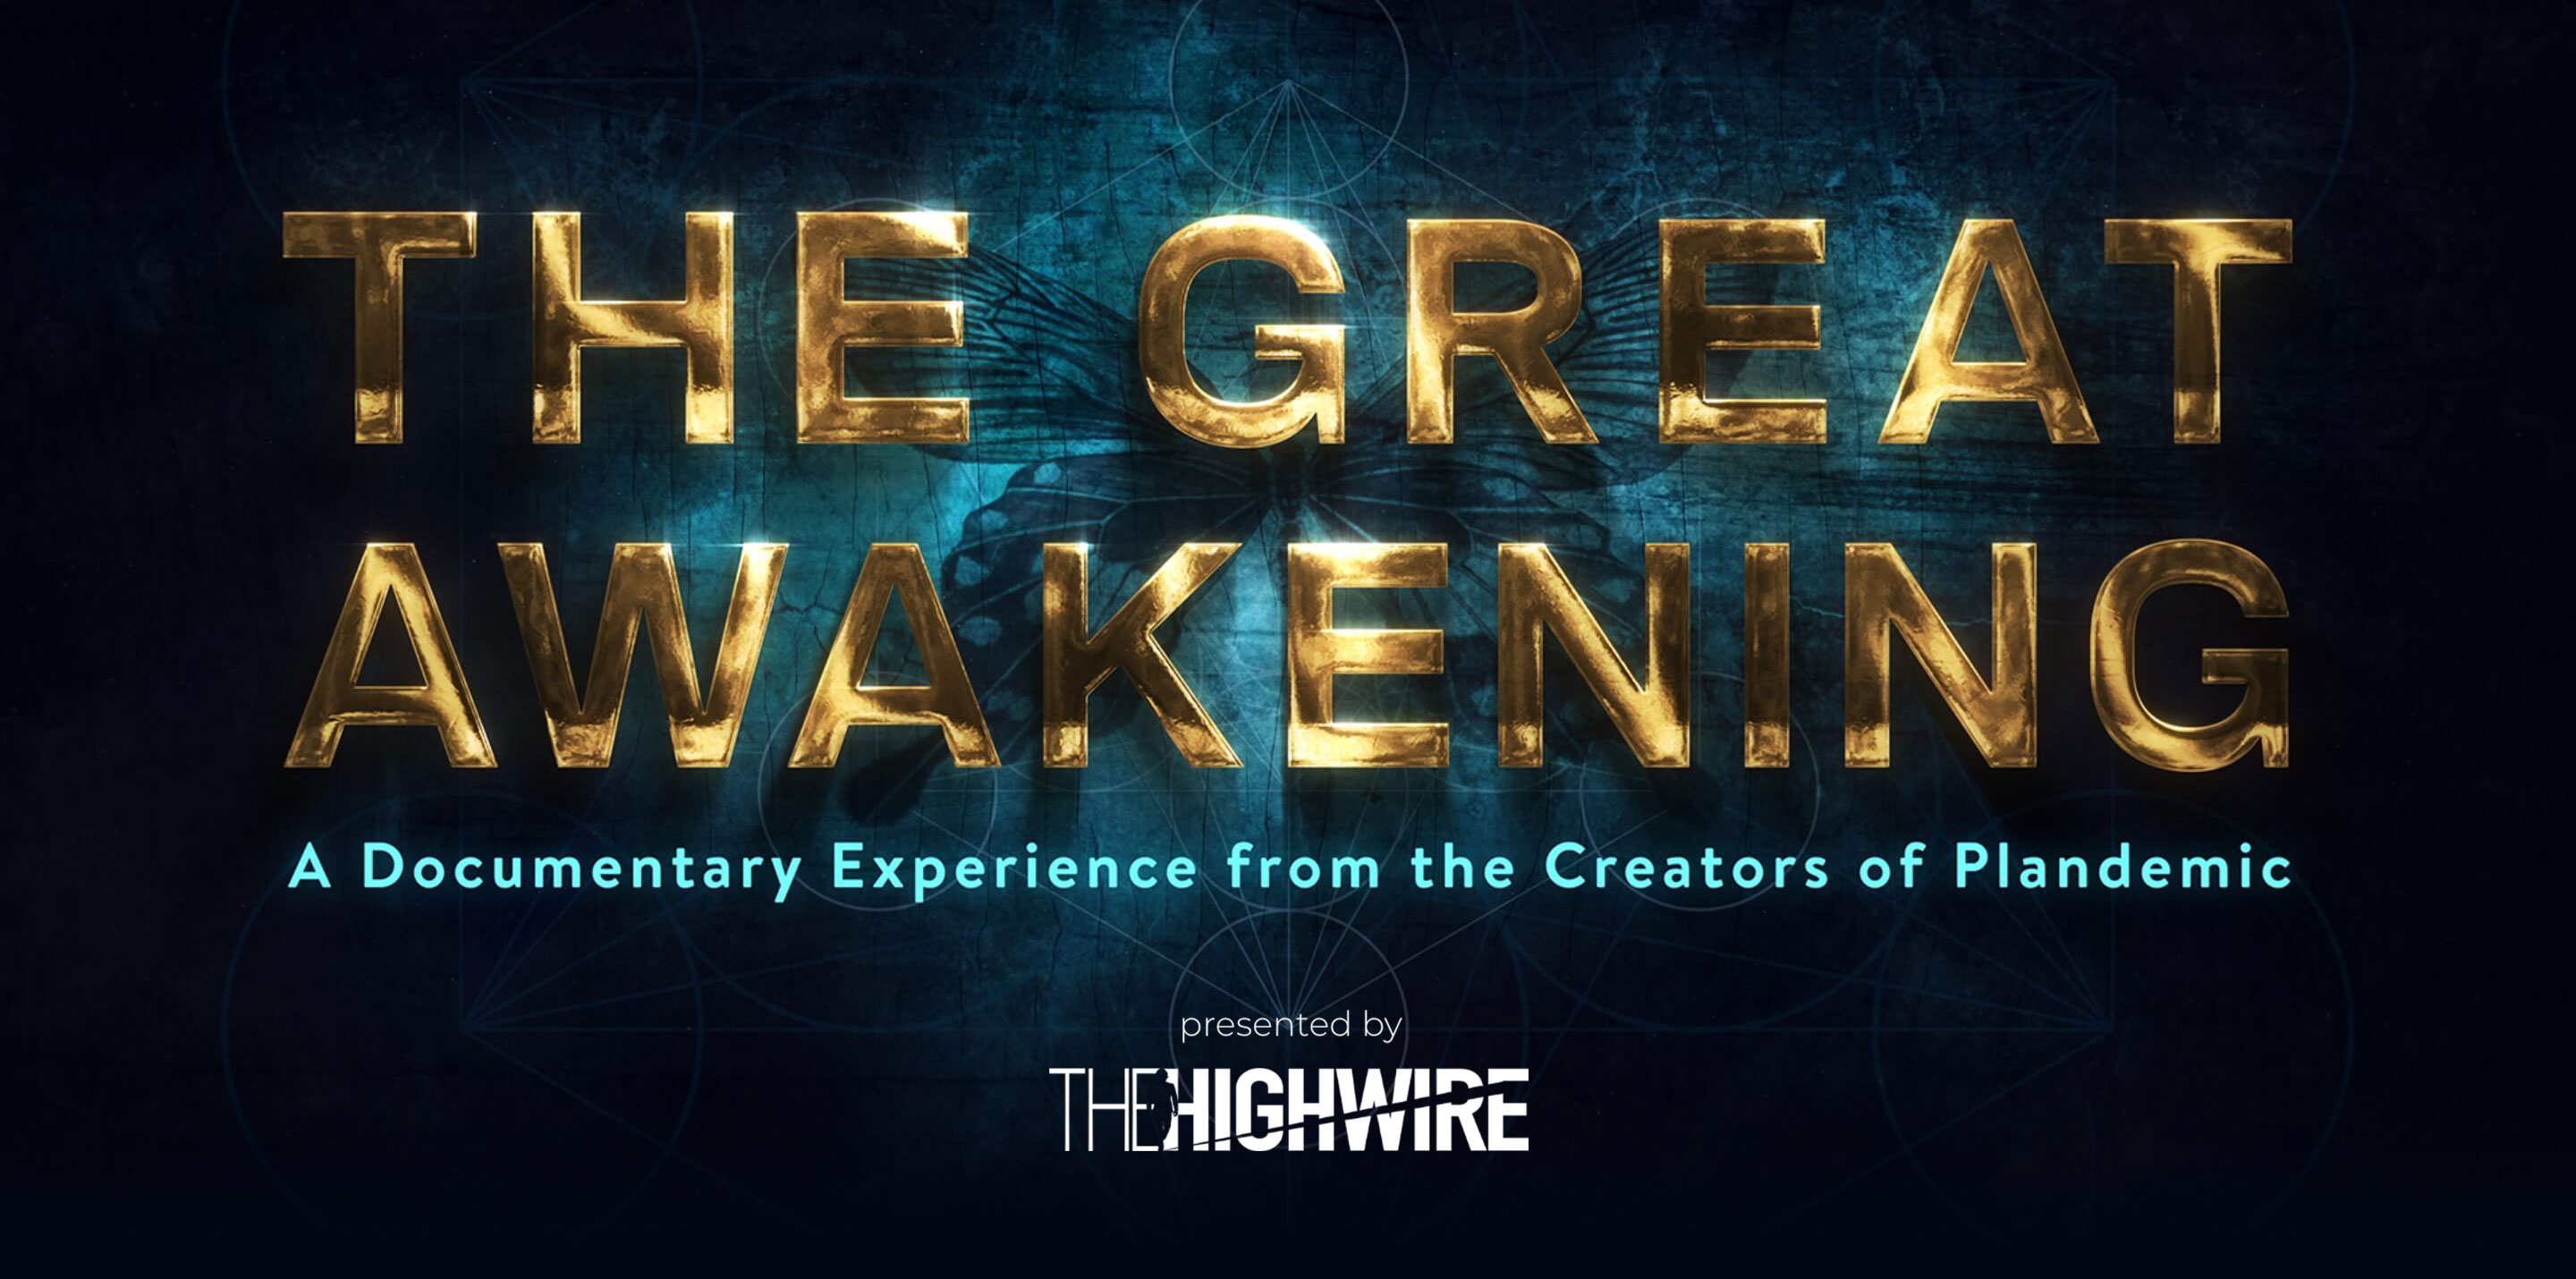 The Great Awakening. A Documentary Experience from the Creators of Plandemic. Presented by The Highwire